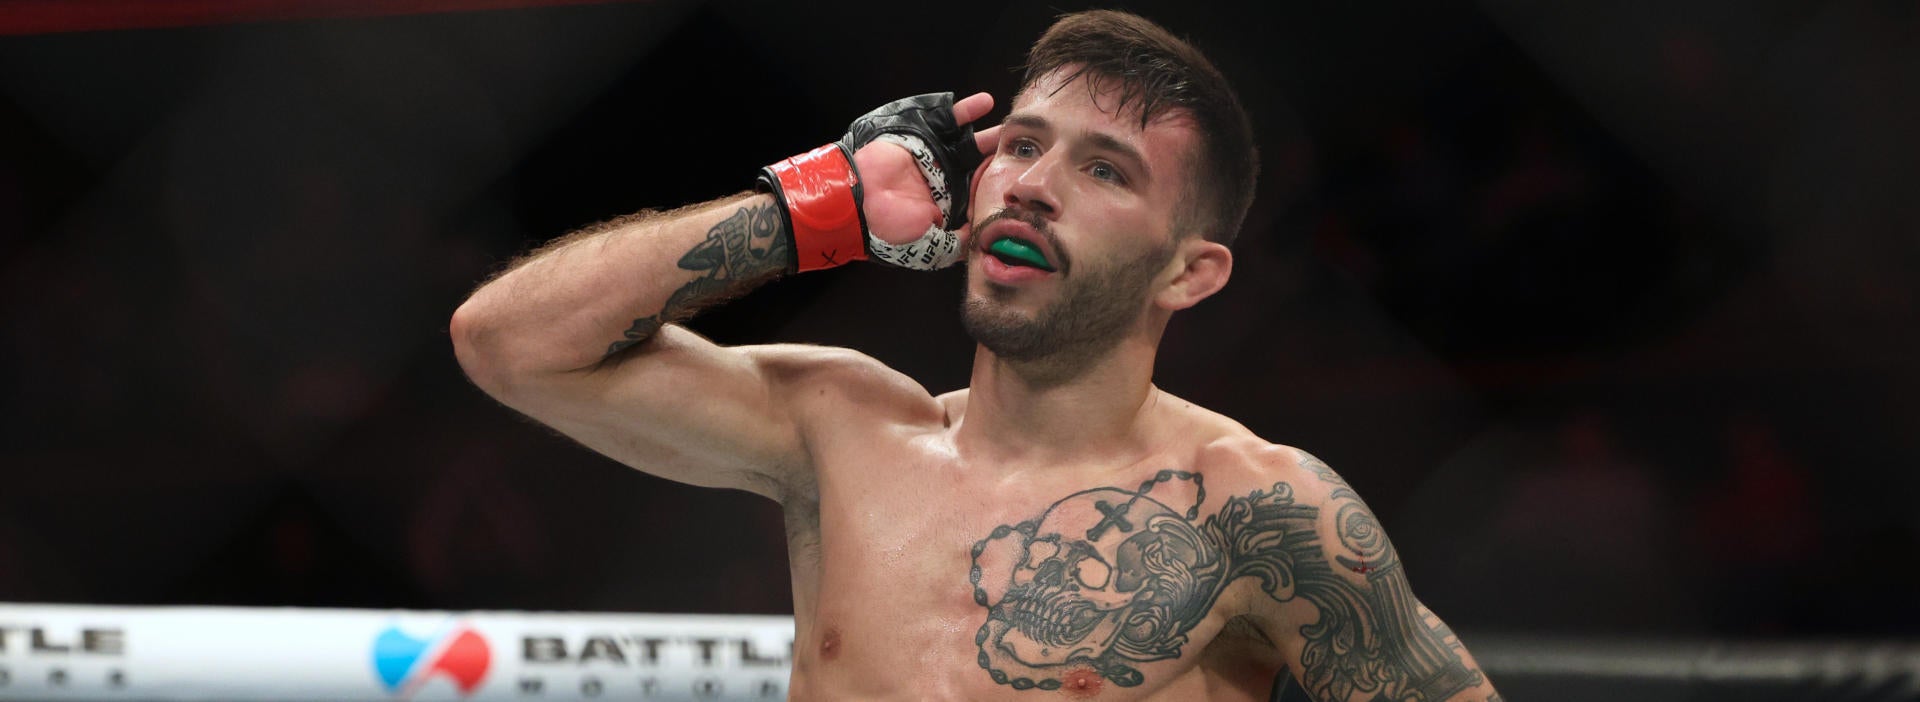 UFC Fight Night odds, picks: Uncanny MMA analyst releases picks for Nicolau vs. Perez and other fights for April 27 showcase